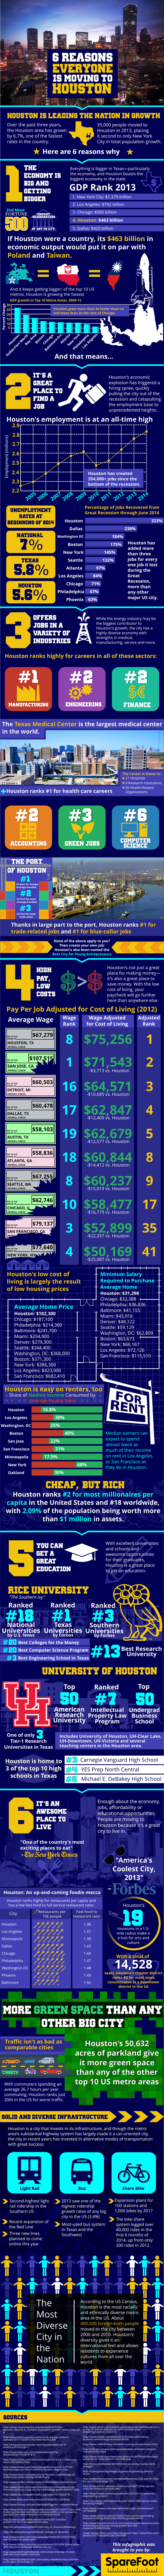 moving-to-houston-infographic